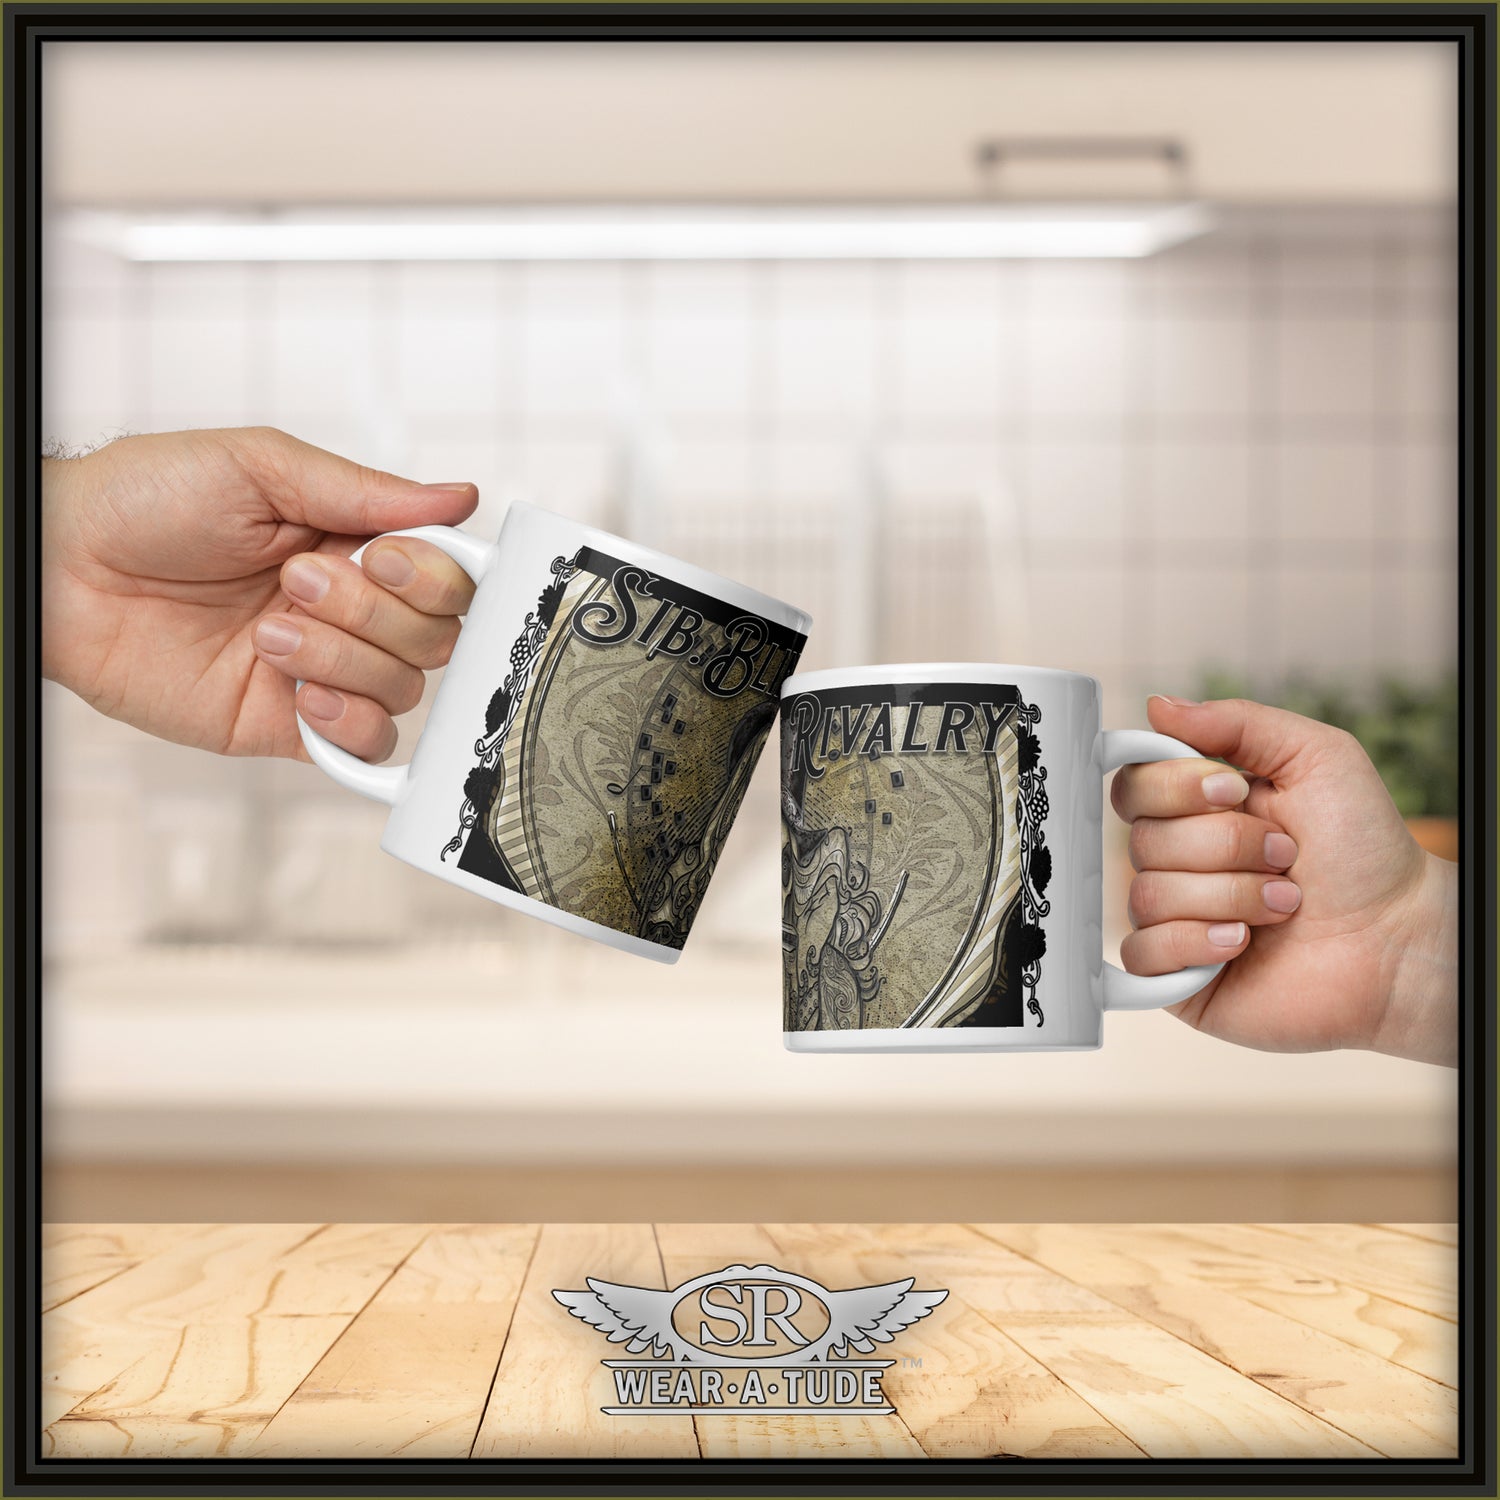 Voodoo Harmonica Girl on three sizes on white coffee mug. This is one of our most popular designs with SR Wear Atude. The old gritty parchment paper look with our skull girl will be the first mug to grab every day. Our white mugs are sturdy, glossy with a vivid print that&